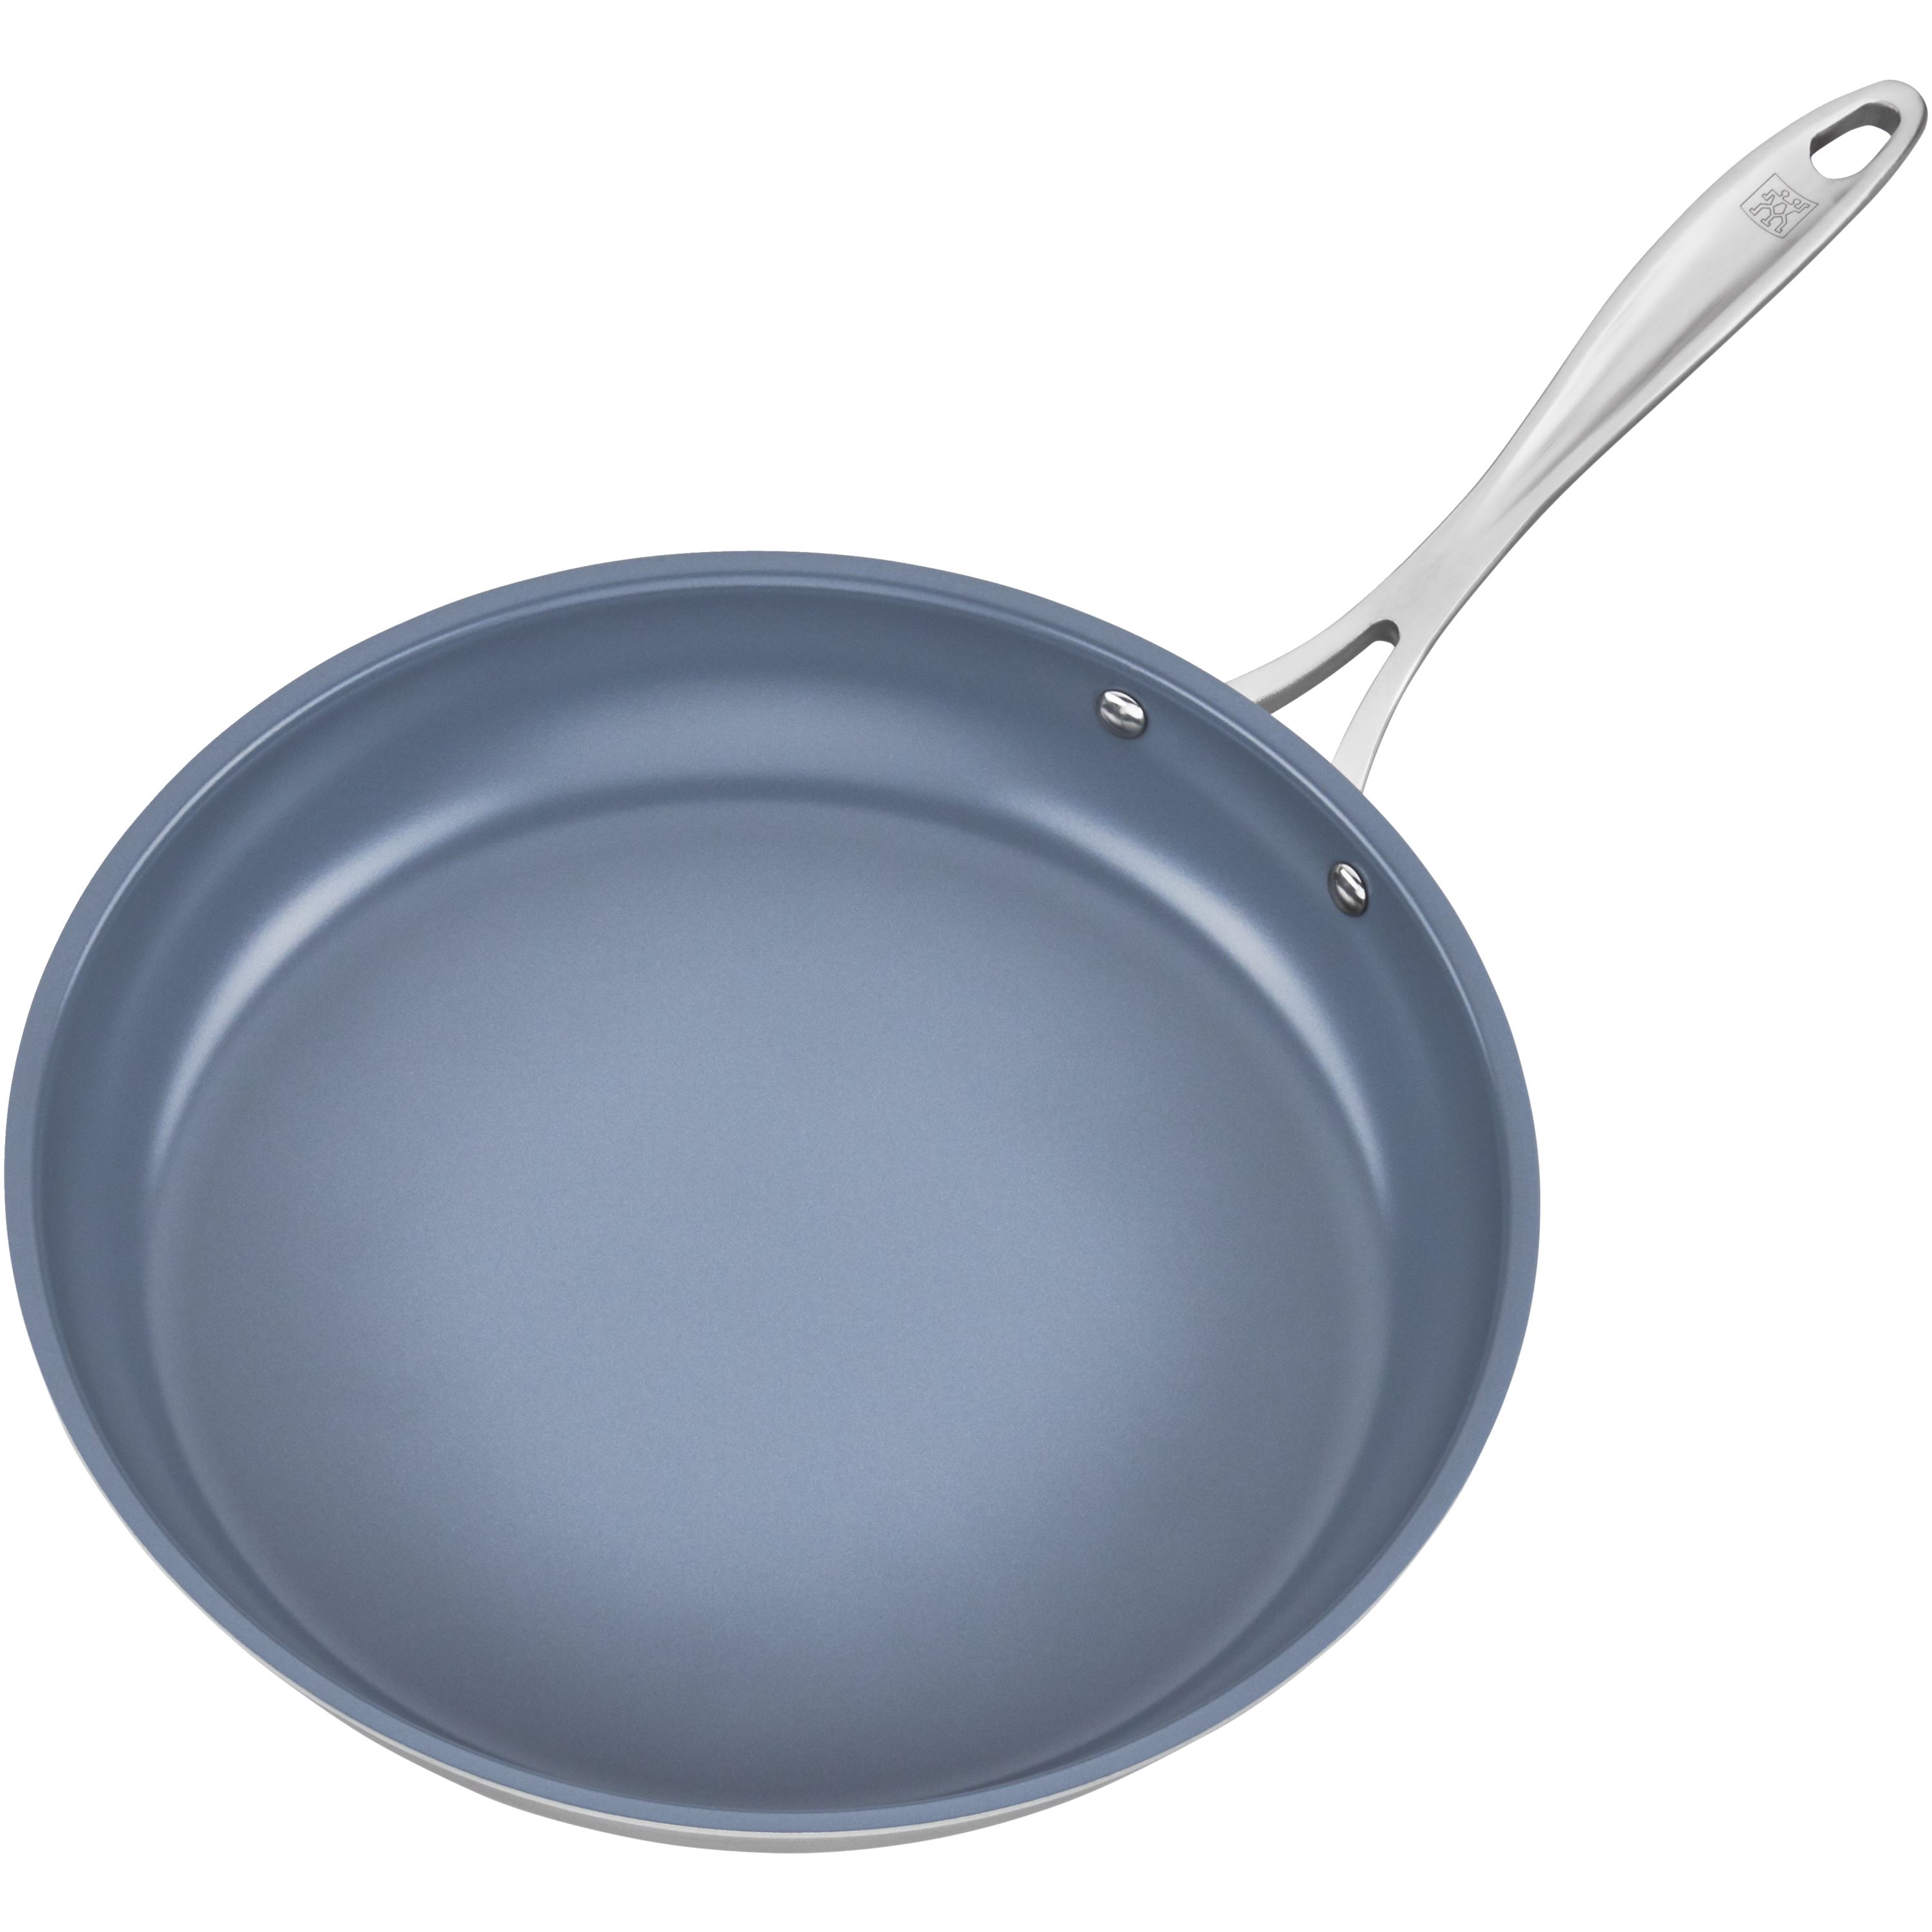 ZWILLING Spirit Stainless Sigma Clad, 8-inch, 18/10 Stainless Steel,  Ceramic, Frying pan